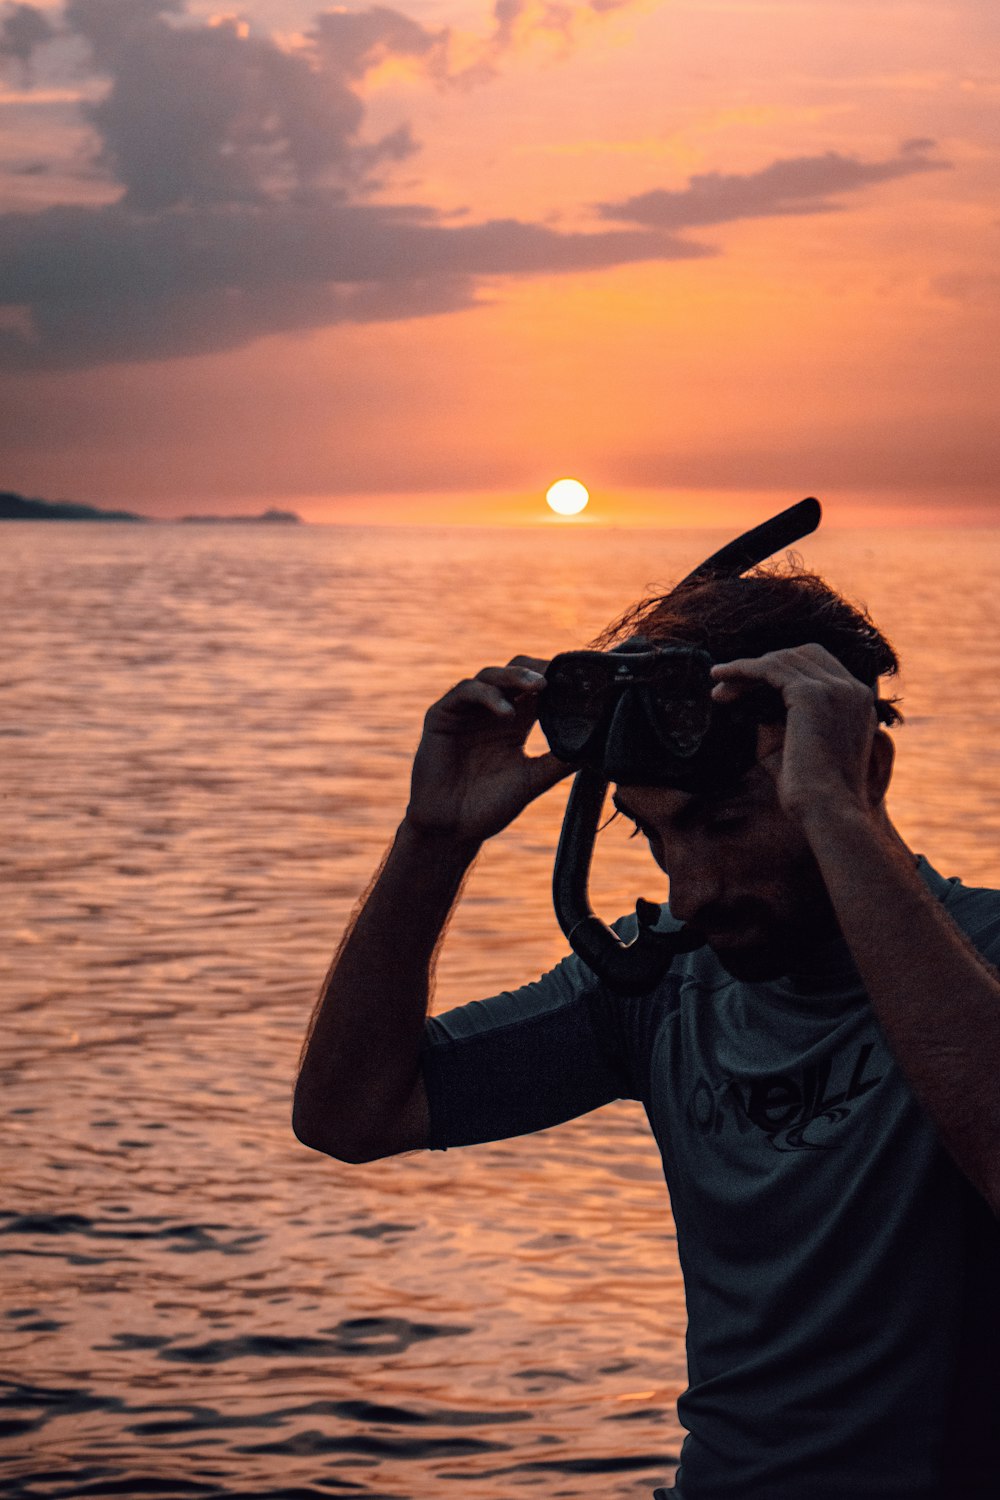 a person taking a picture of the sunset